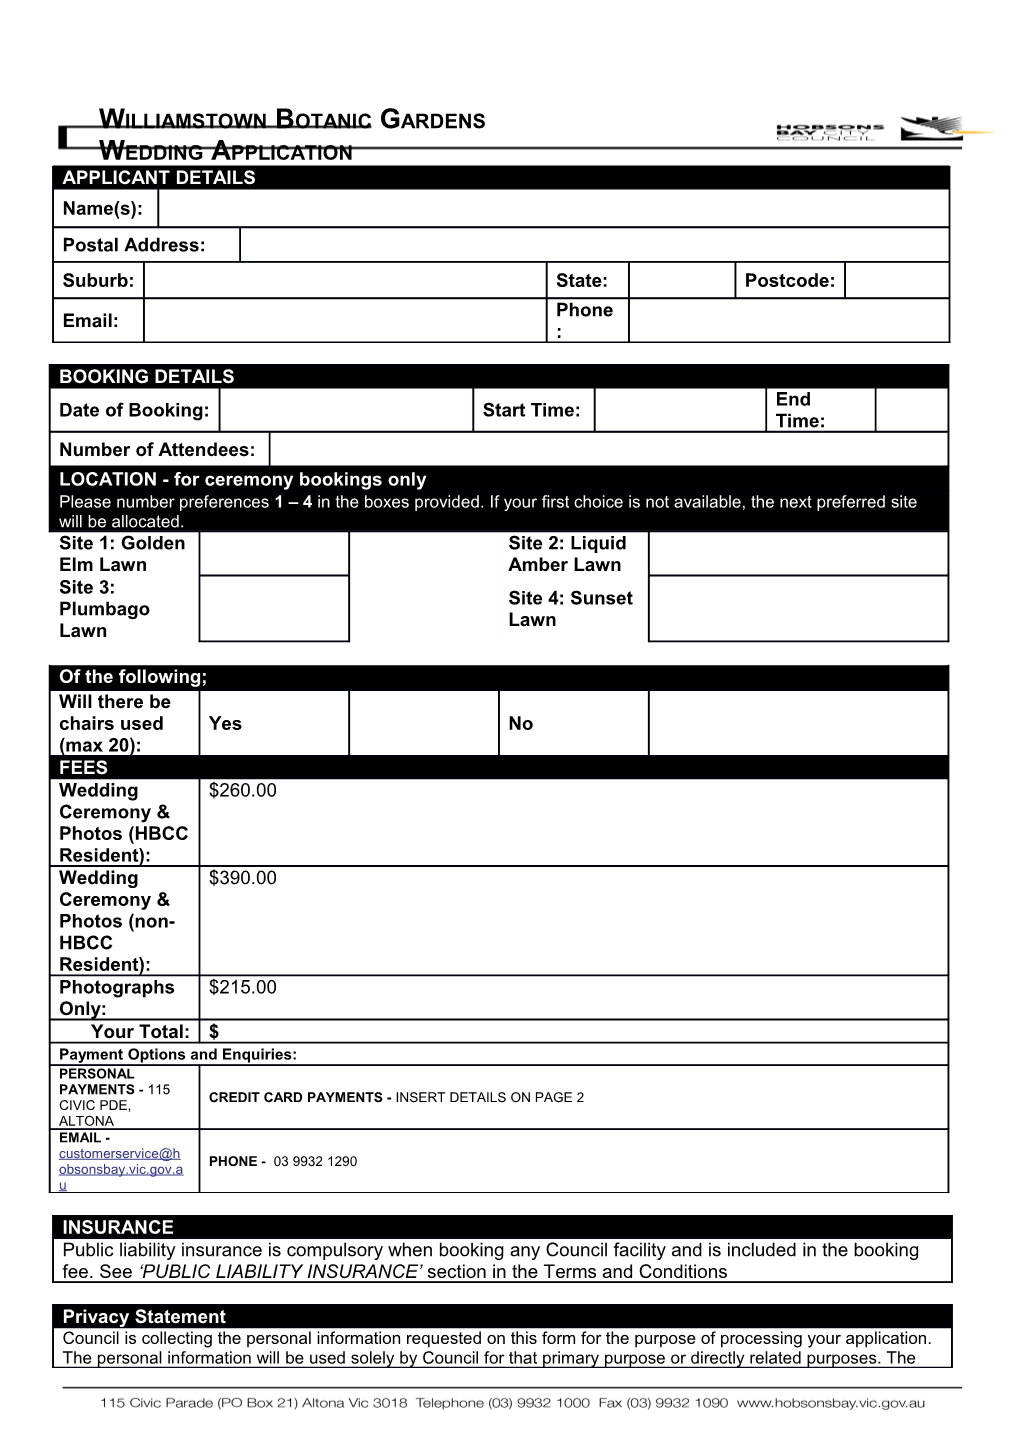 When Paid, This Form Serves As a Tax Invoice